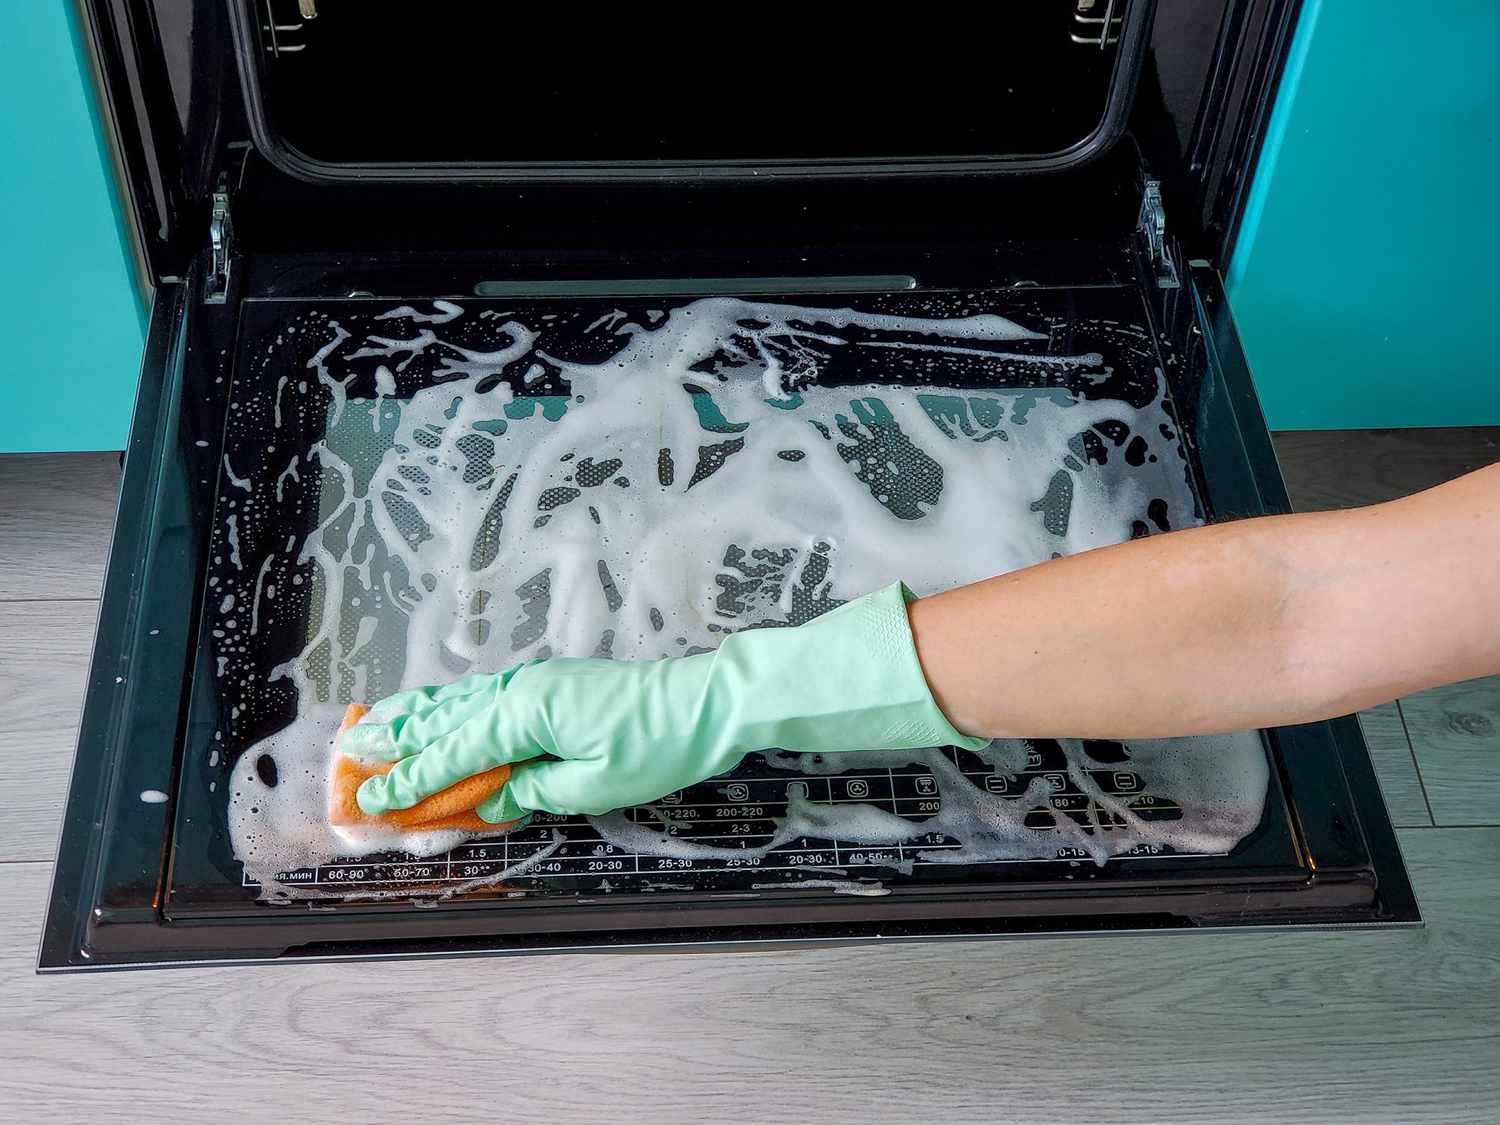 How to Clean a Glass Oven Door When It Gets Really Gross